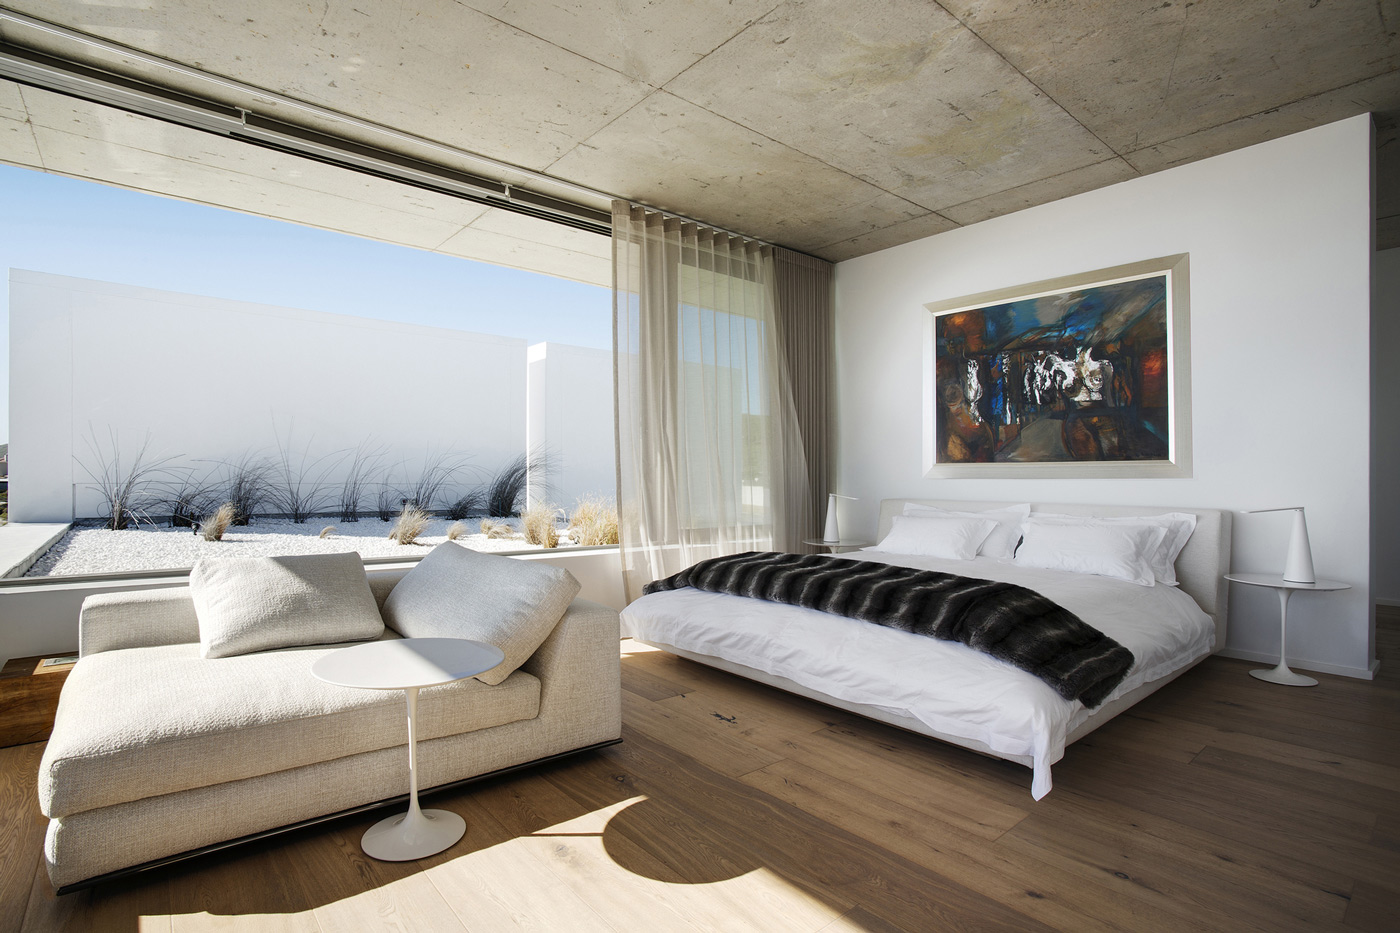 Bedroom, Art, Holiday Home in Yzerfontein, South Africa